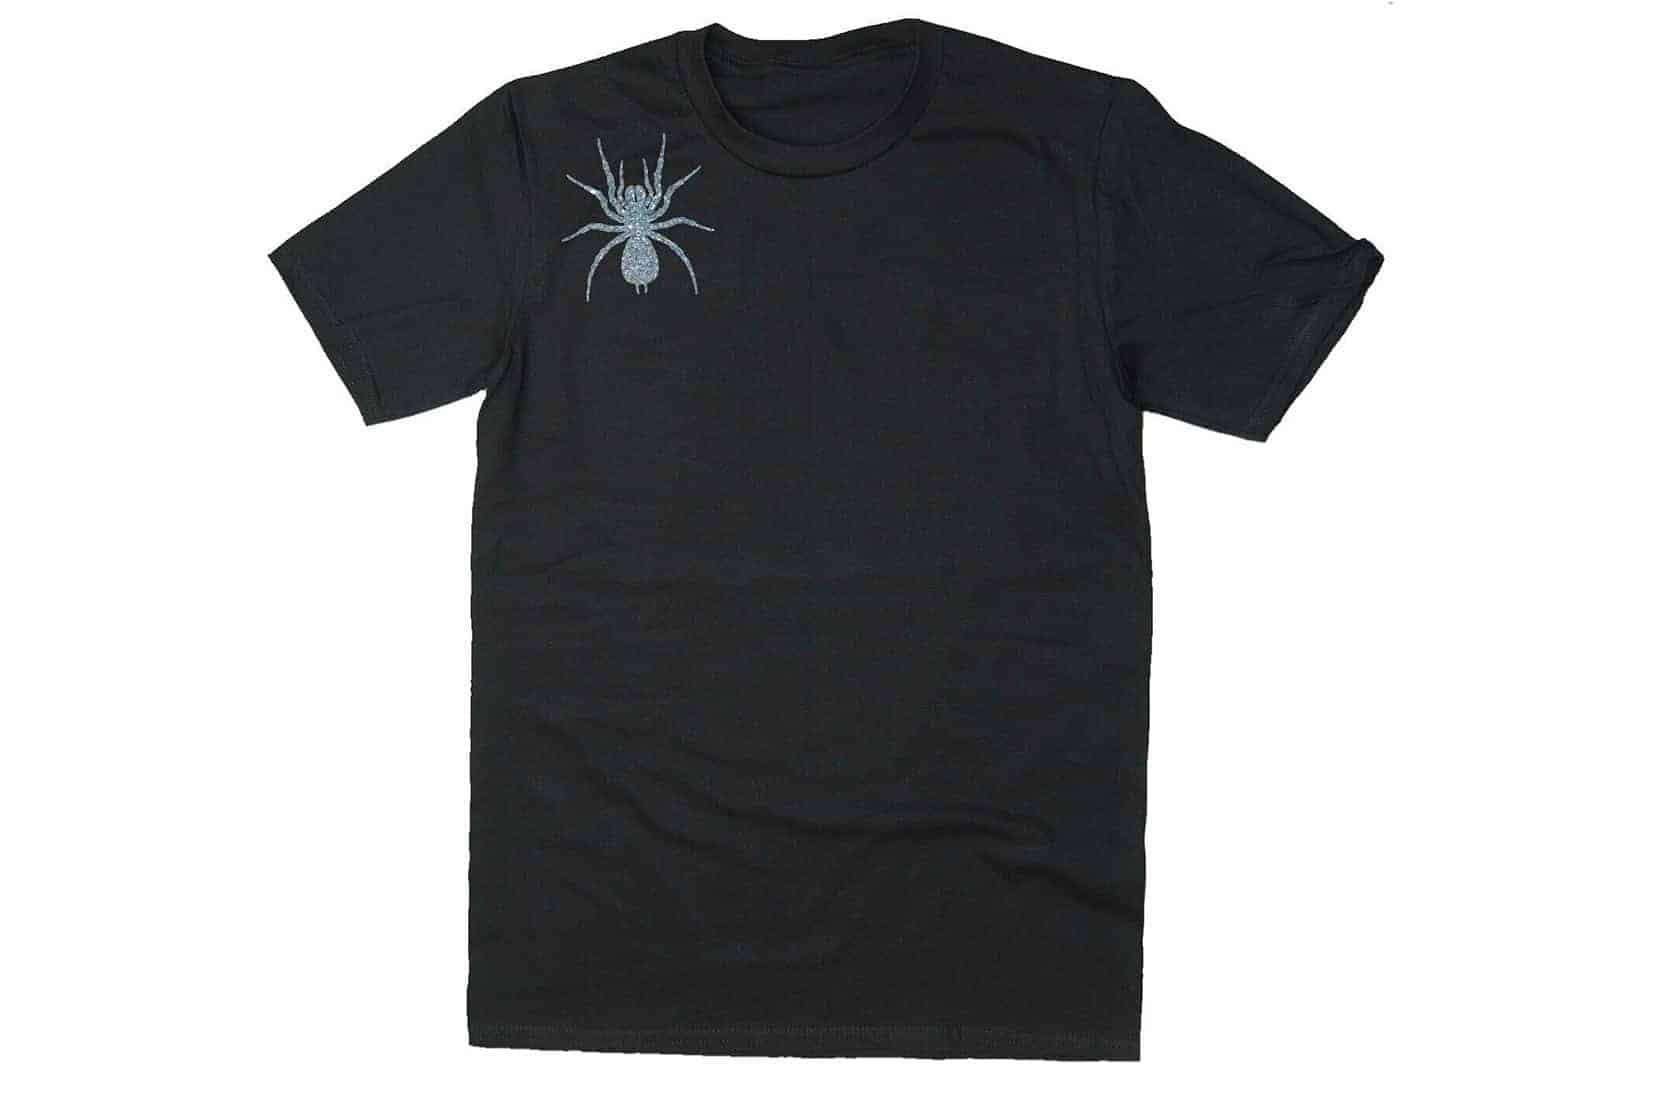 Lady Hale spider t-shirt sells over 6,000 units in under 24 hours